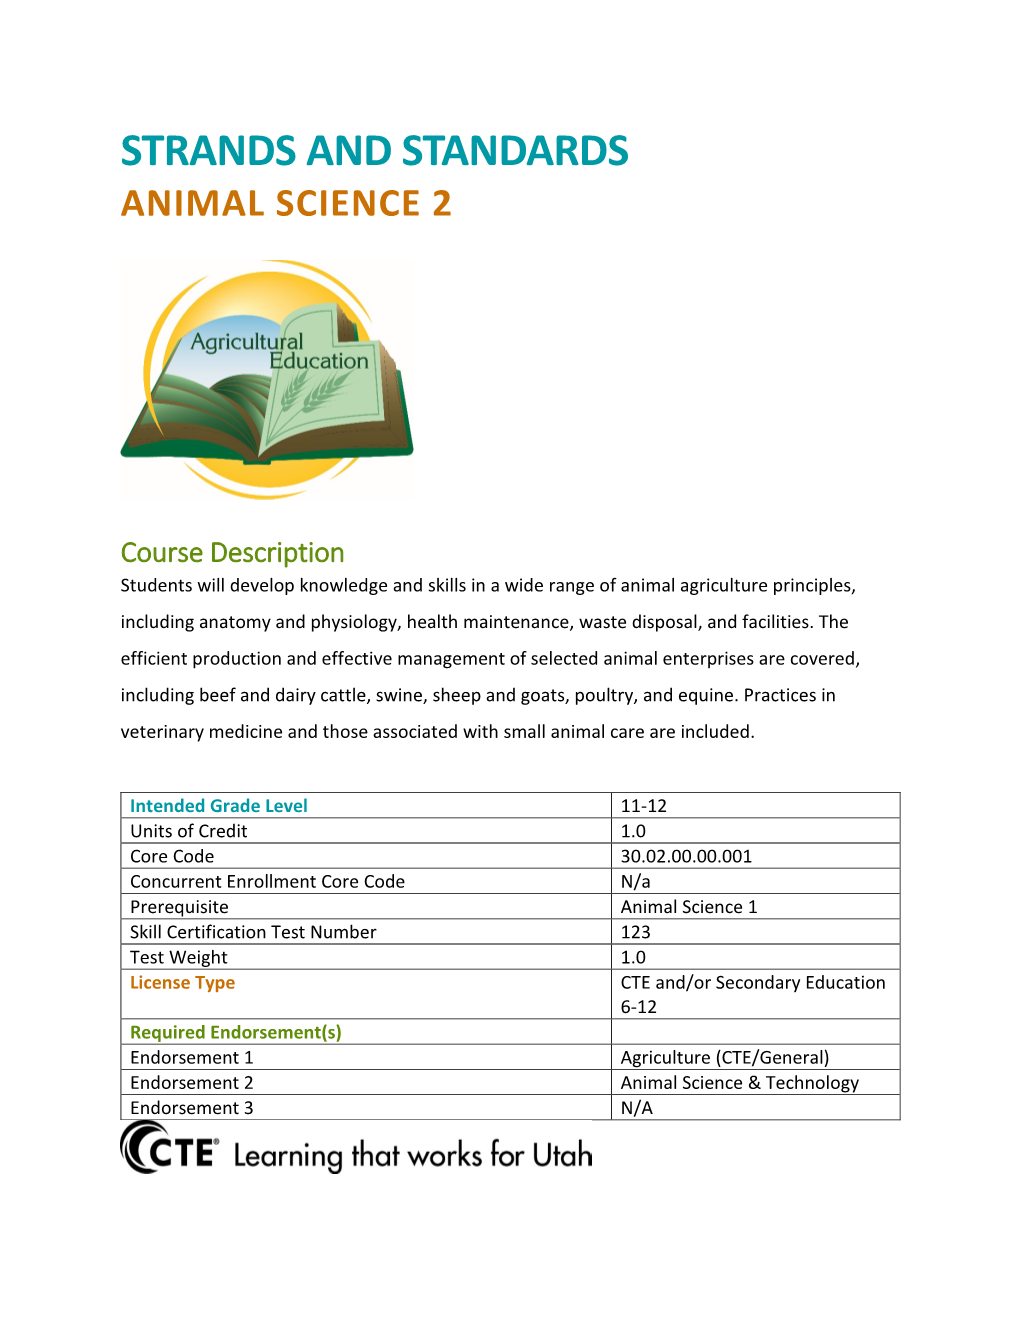 Strands and Standards Animal Science 2